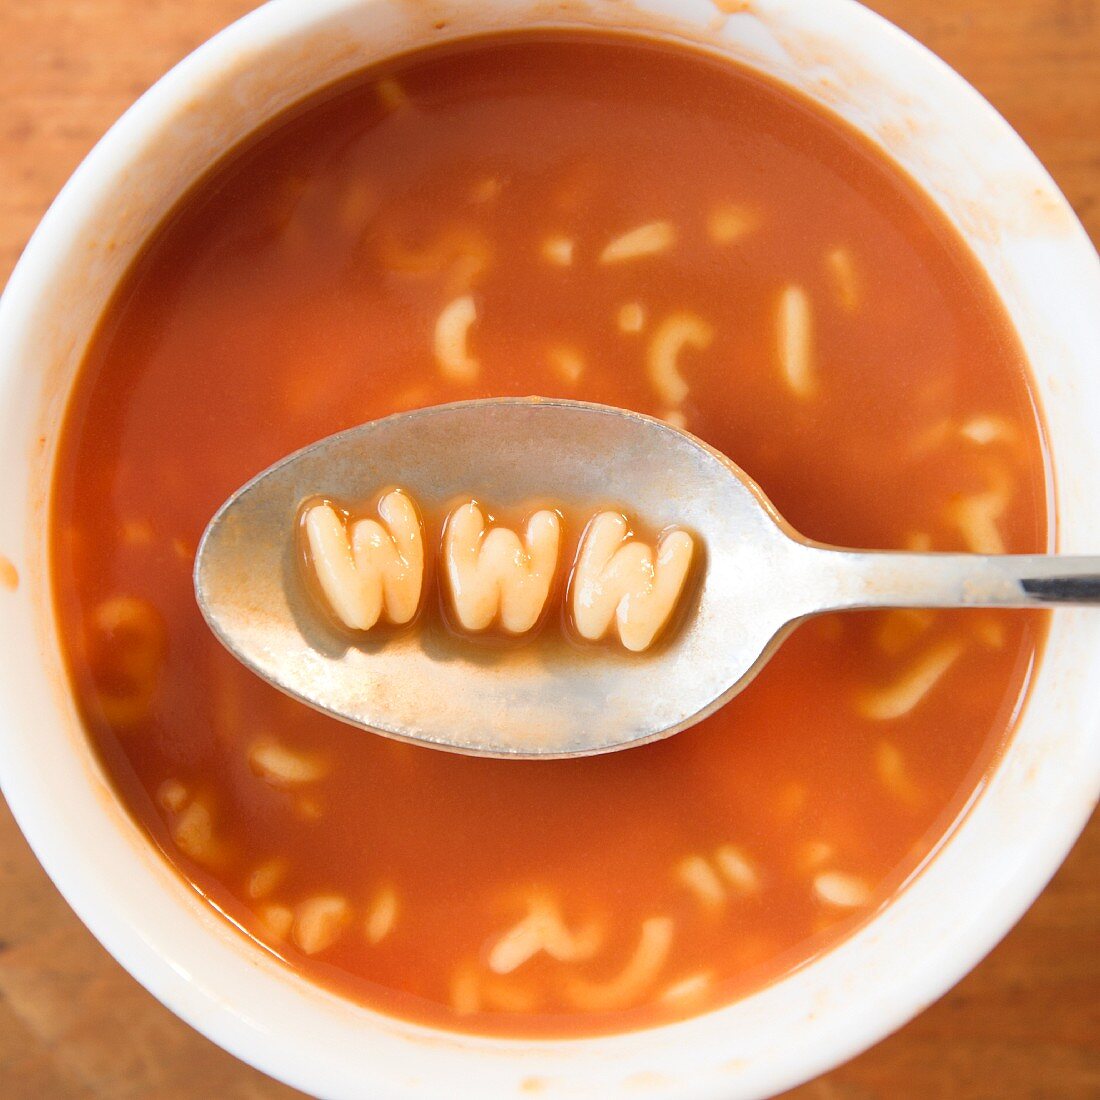 Close up of soup with letter noodles on spoon forming www site